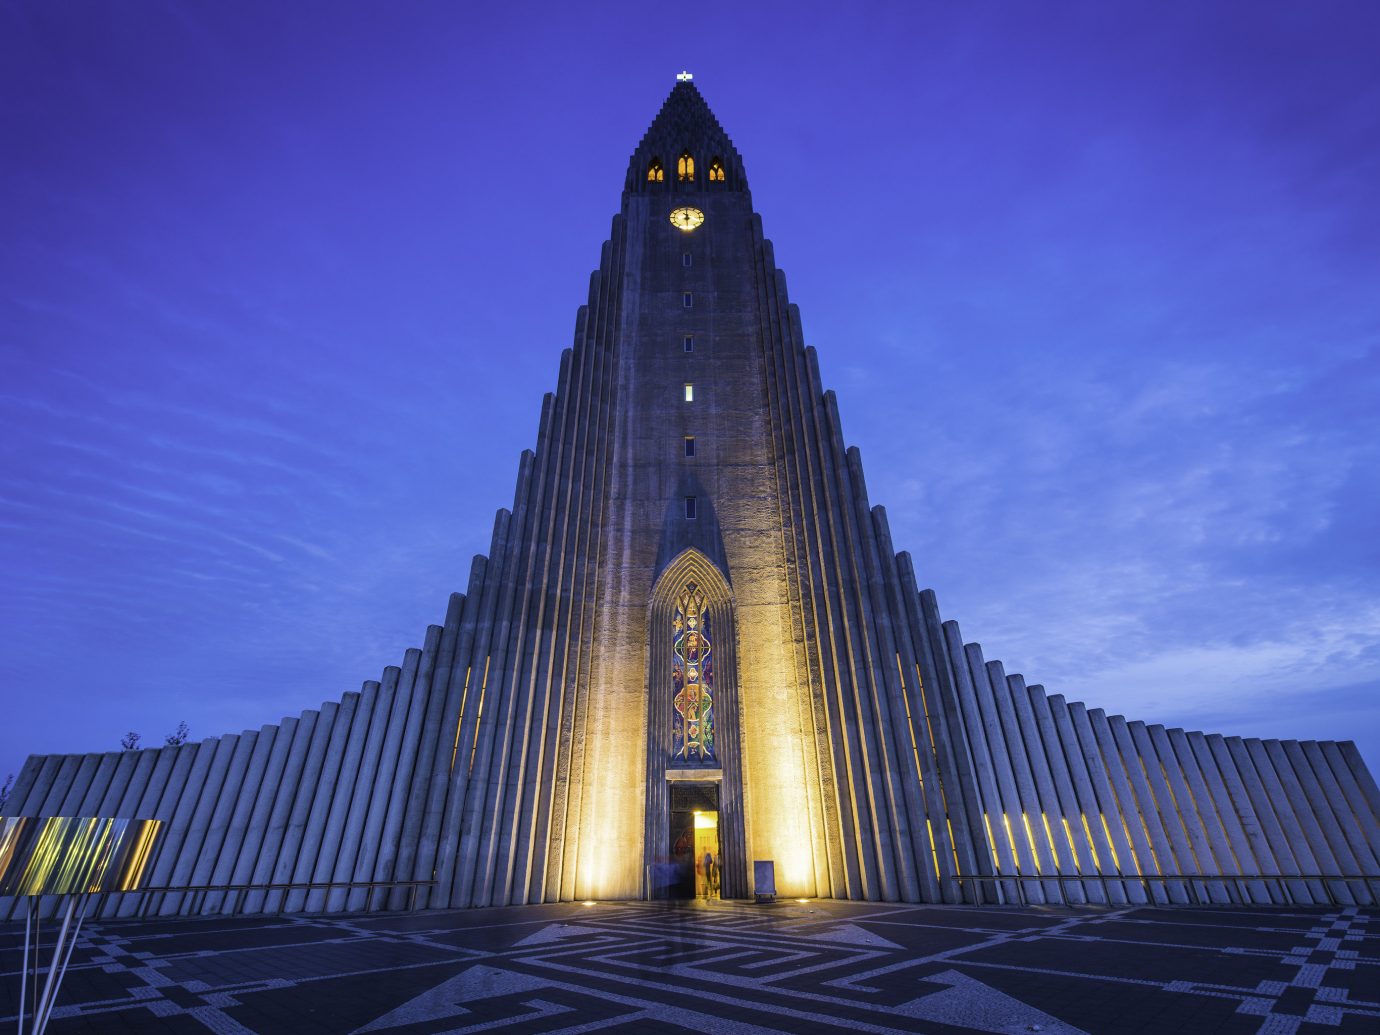 Budget Hotels Iceland Offbeat Outdoors + Adventure Road Trips Trip Ideas outdoor sky tower landmark night building spire place of worship evening cathedral monument symmetry